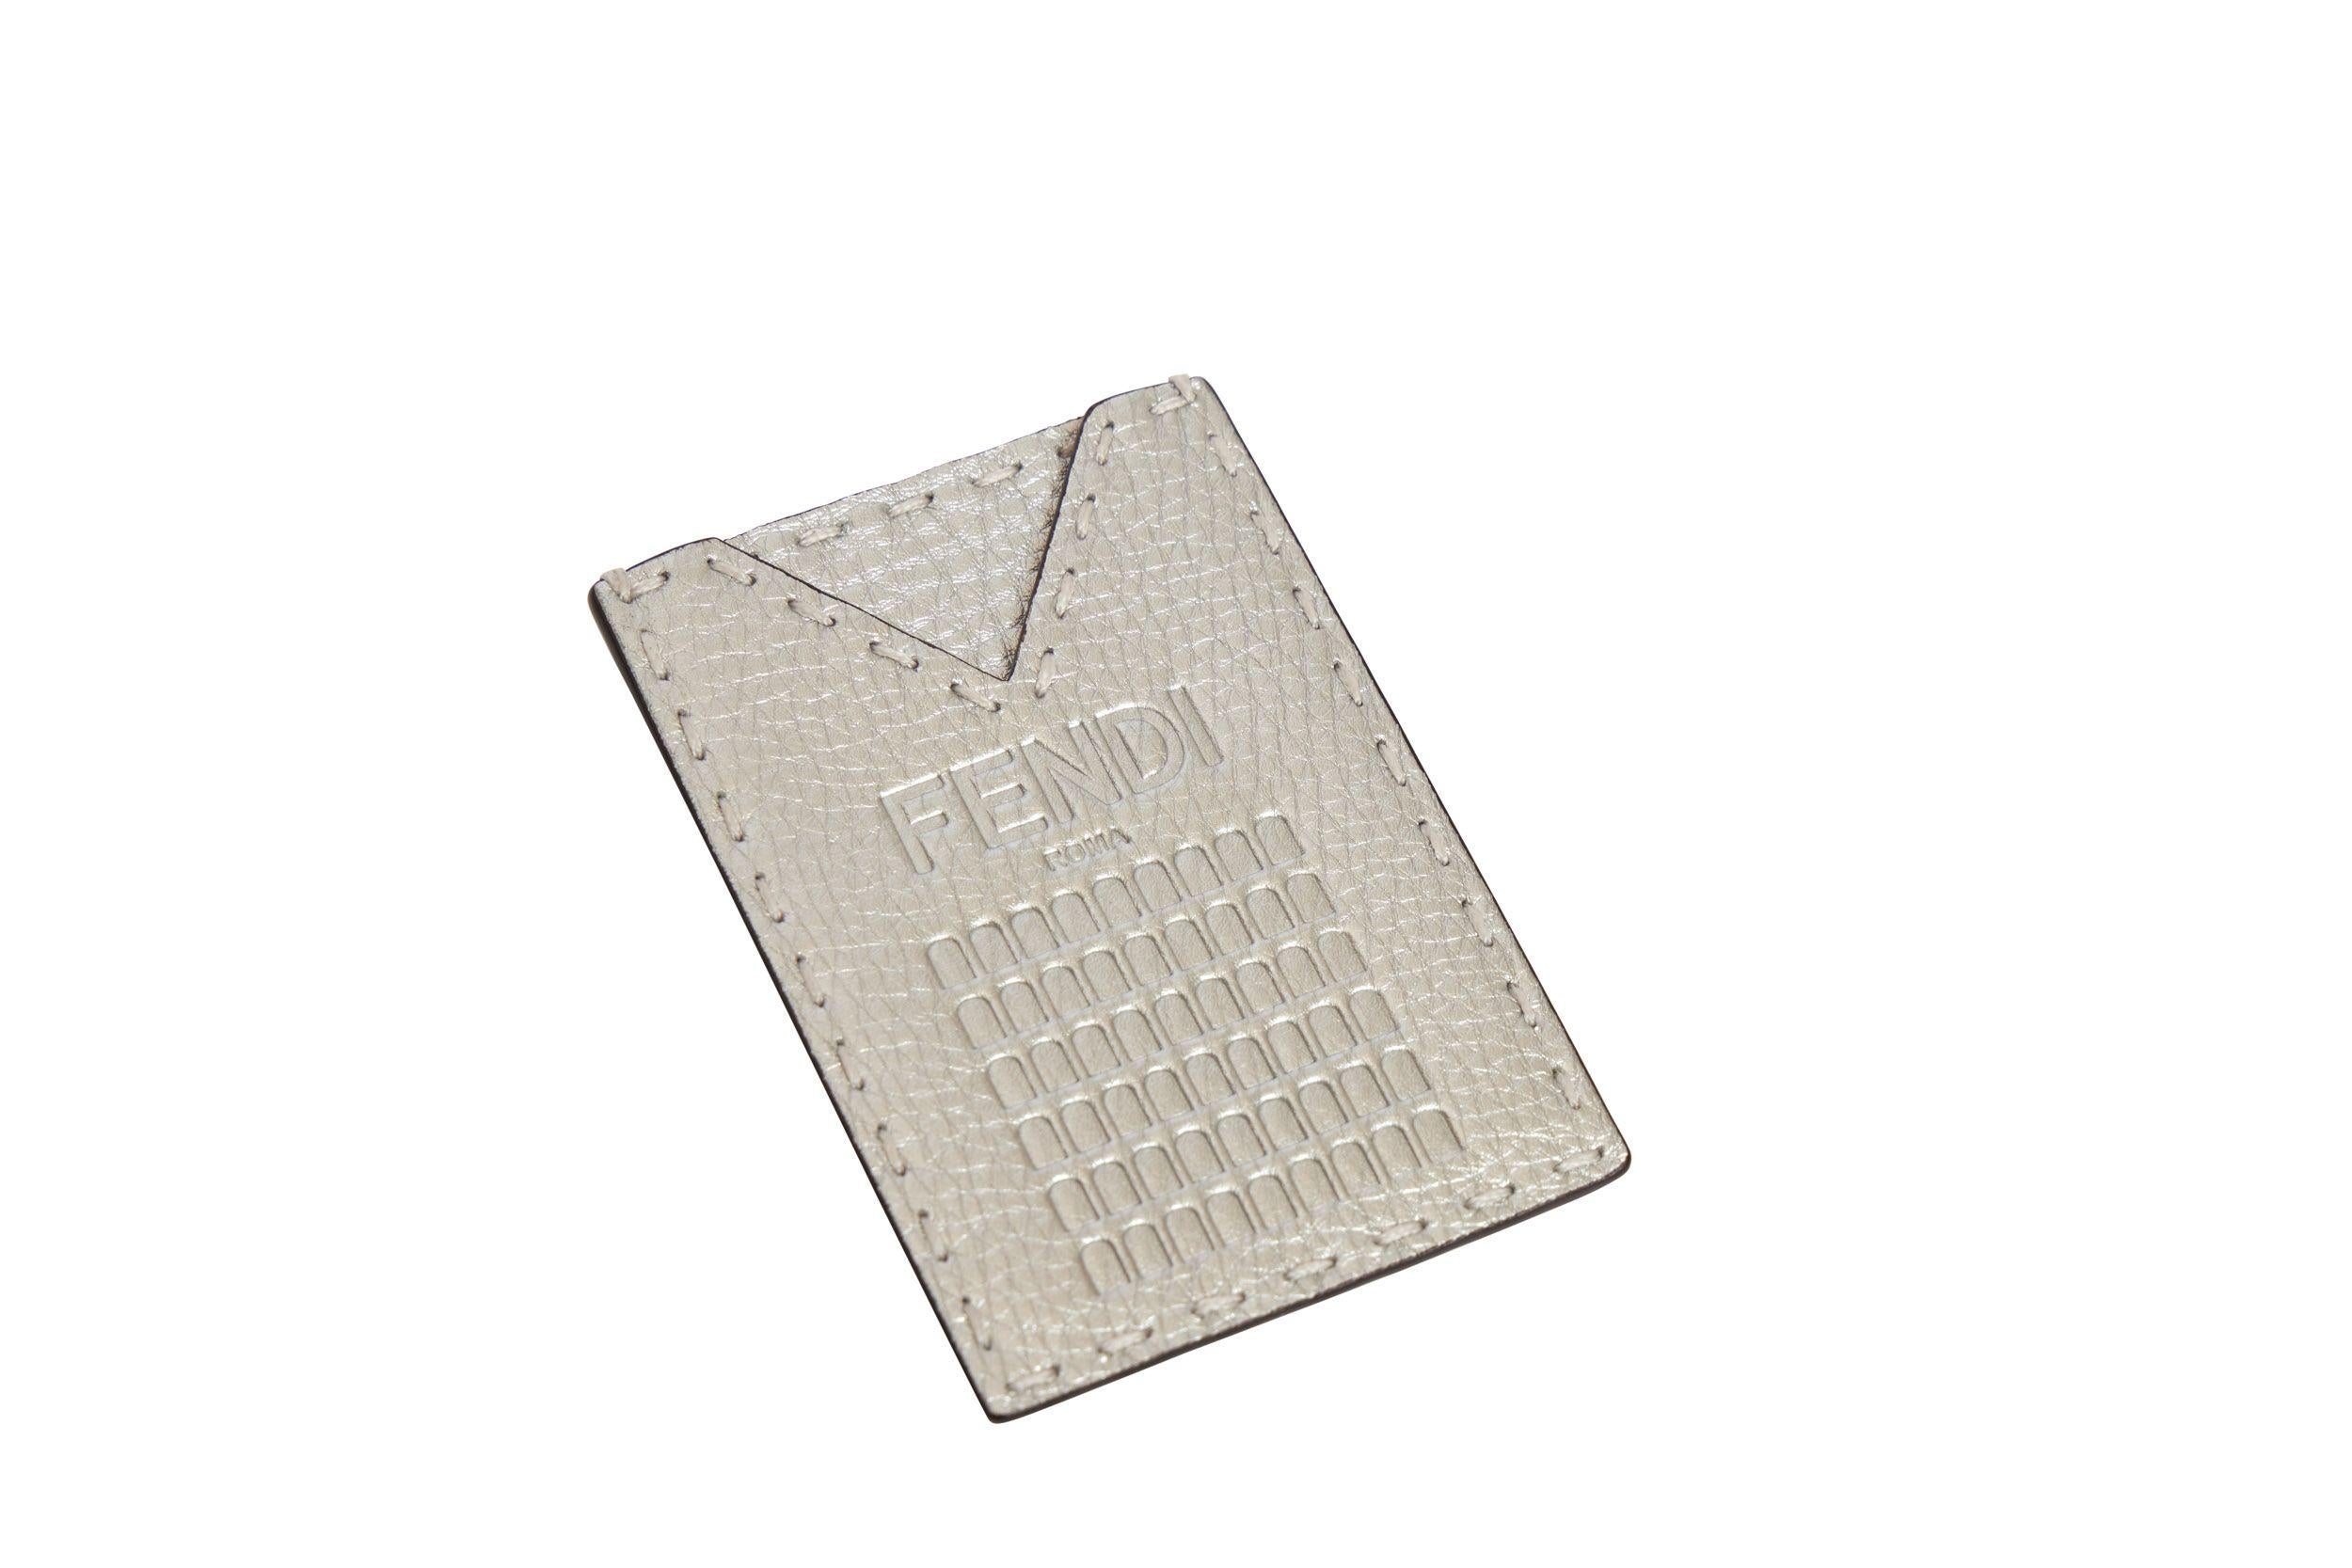 Fendi Roma silver leather embossed card holder. The piece is brand new and comes with the booklet, card and dust cover.